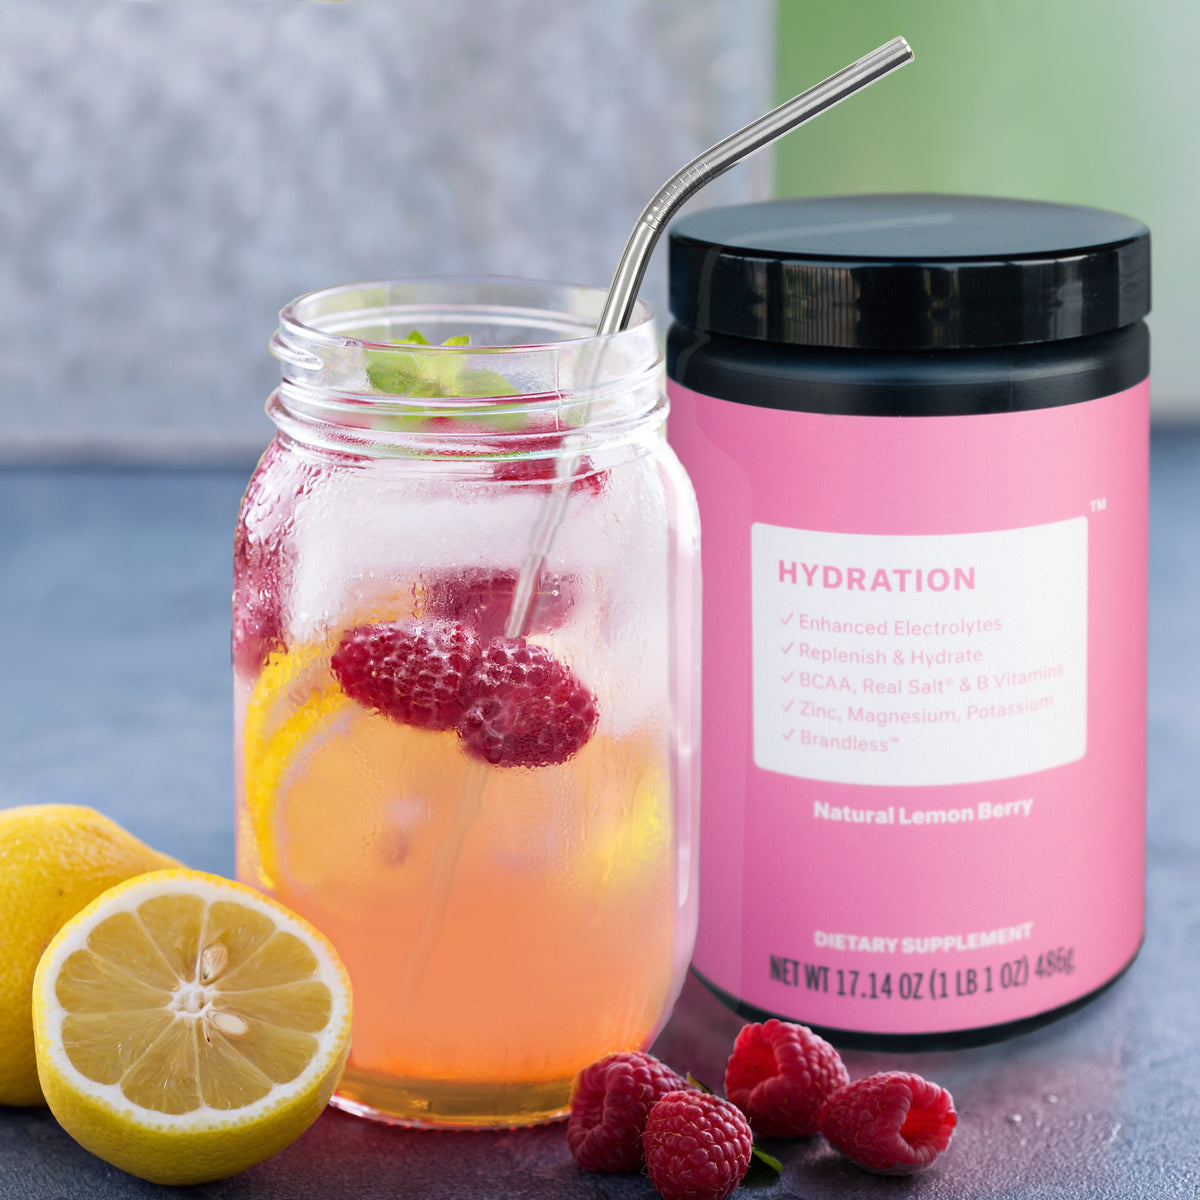 Lifestlye photo, Tub of Brandless Hydration powder next to a mason jar with fresh lemon slices and raspberries mixed into a beverage with the Hydration powder as the base.